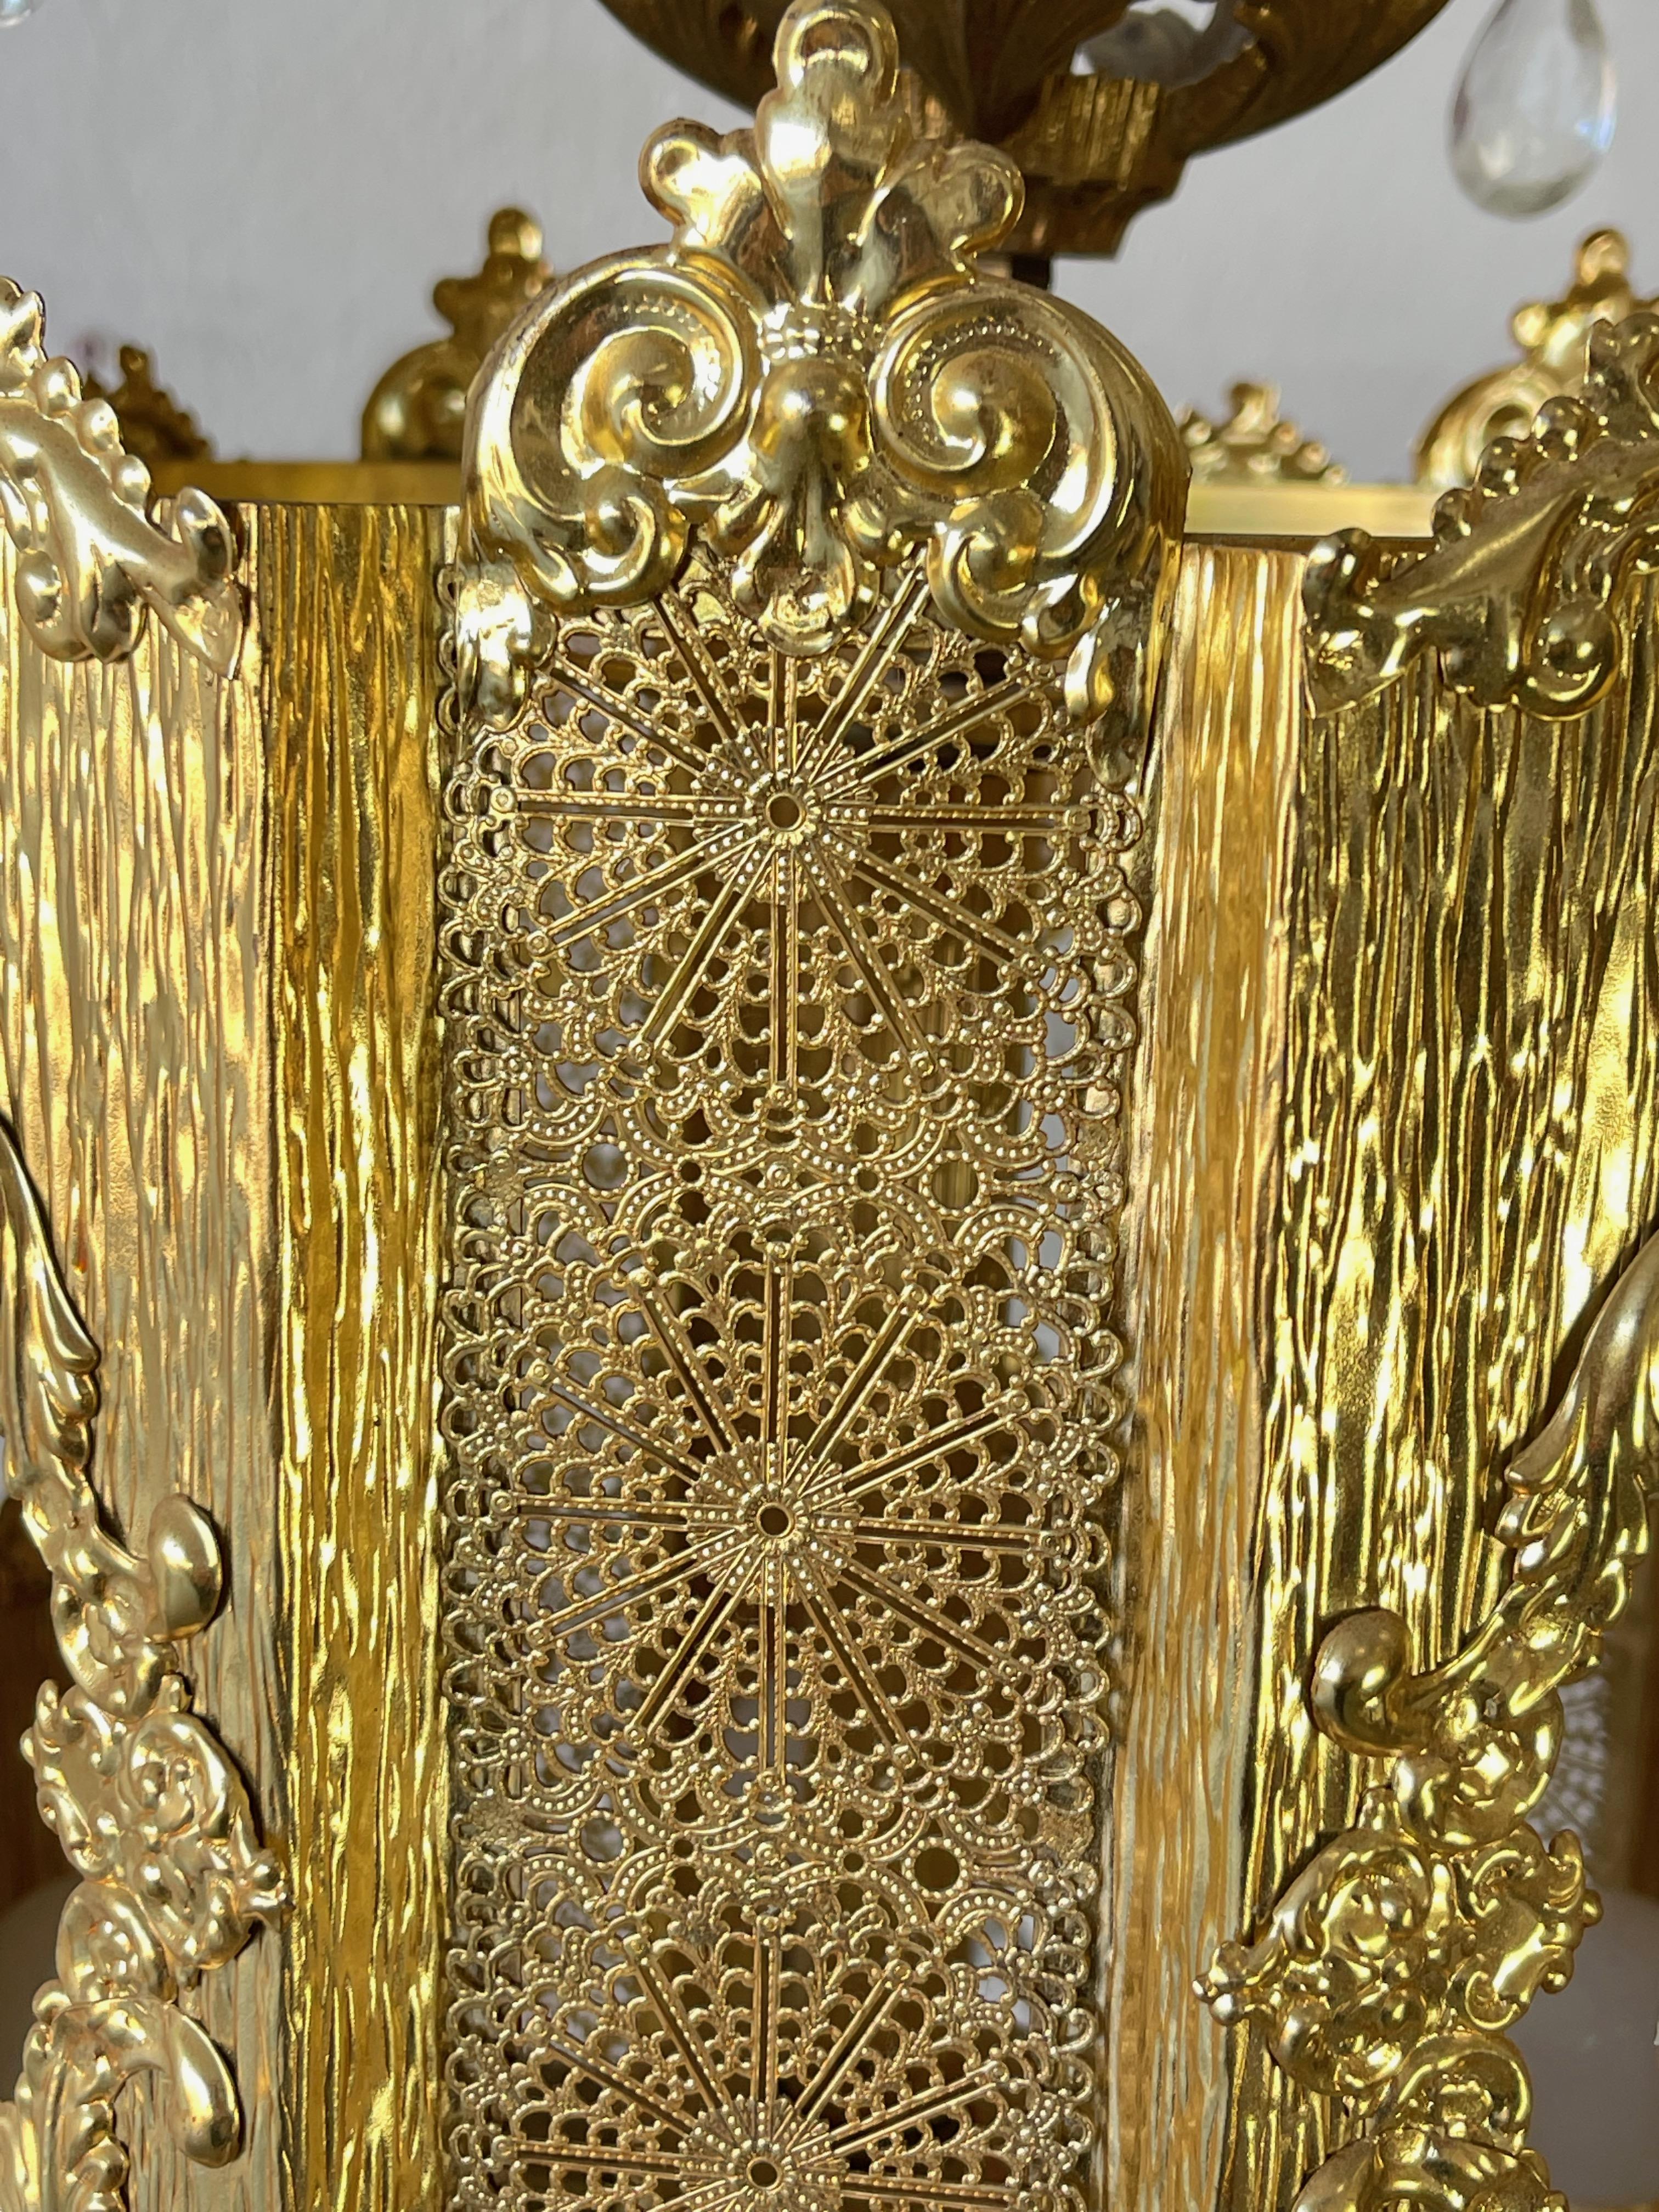 This is a really exquisite antique Hollywood Regency/Brass Filigree lantern style swag chandelier.The Brass work is very nice with high quality construction. The beautiful brass framework has lovely filigree work in the top and bottom. Sparkling